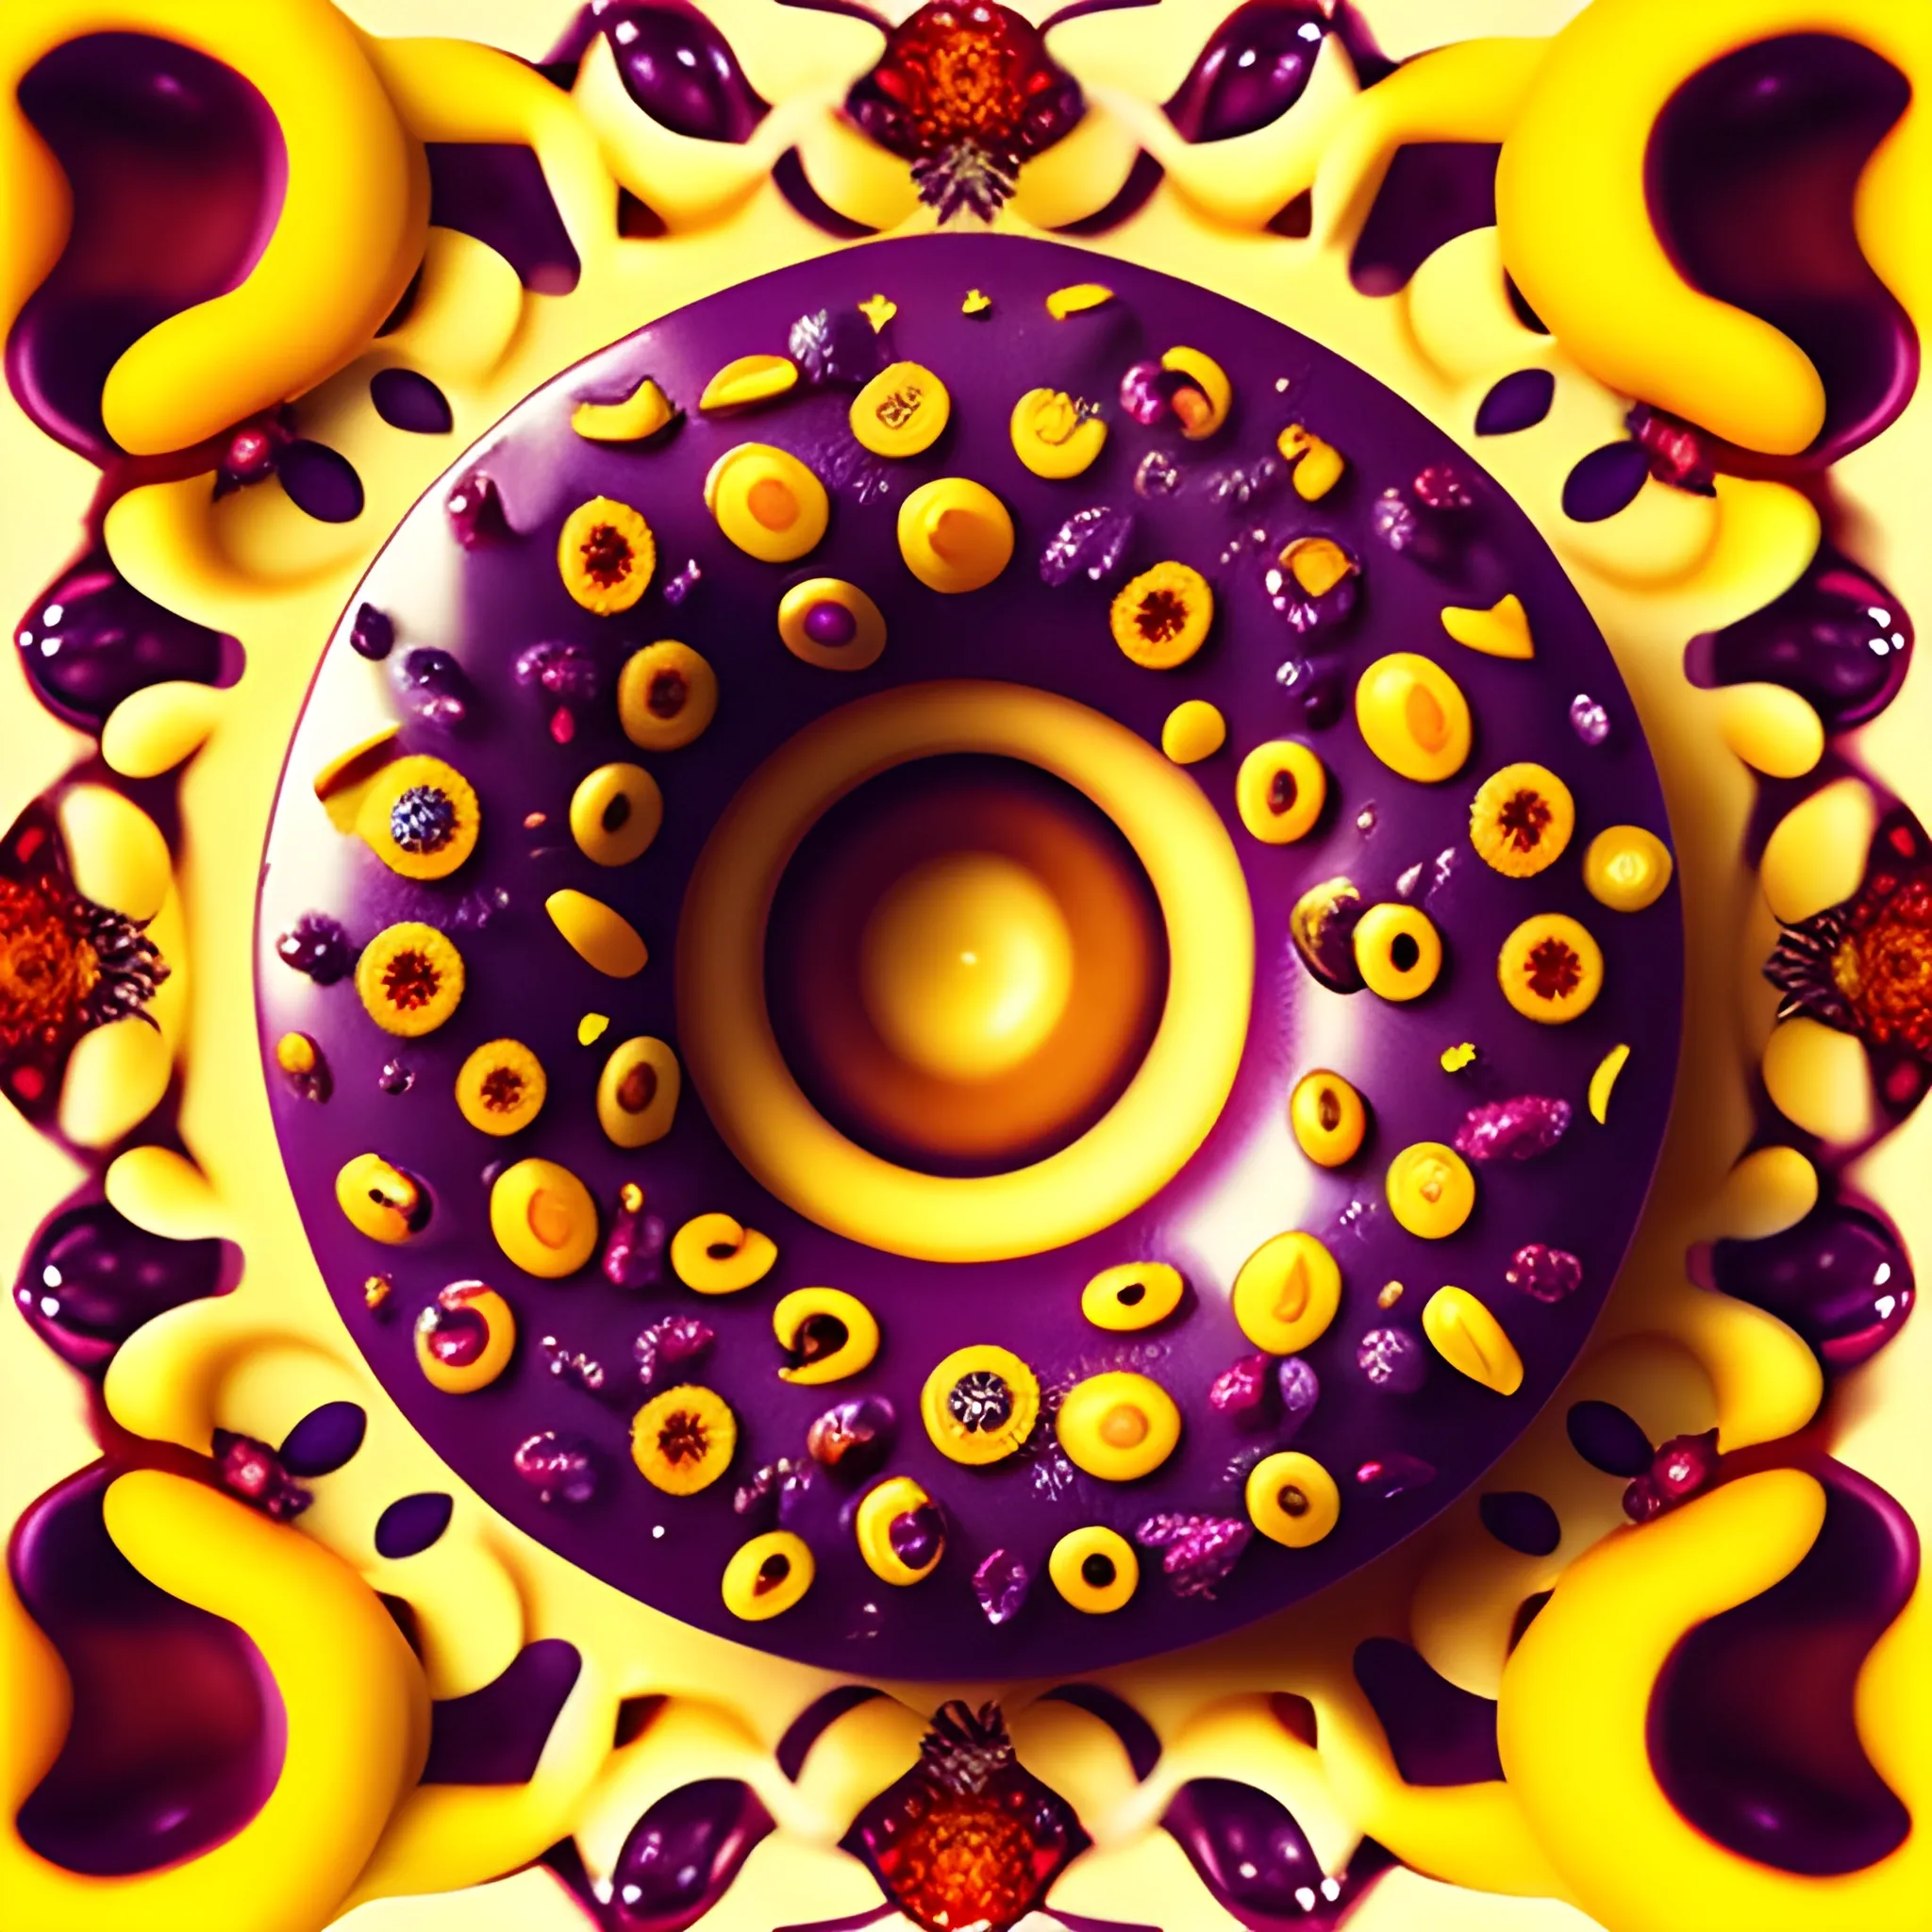 Make a huge donut full of caramel, chocolate, lemon cream, blackberries, macro photography, abstract, surreal art, Surrealism, whimsical illustrations, vibrant colors, intricate details, illustration,, 3D